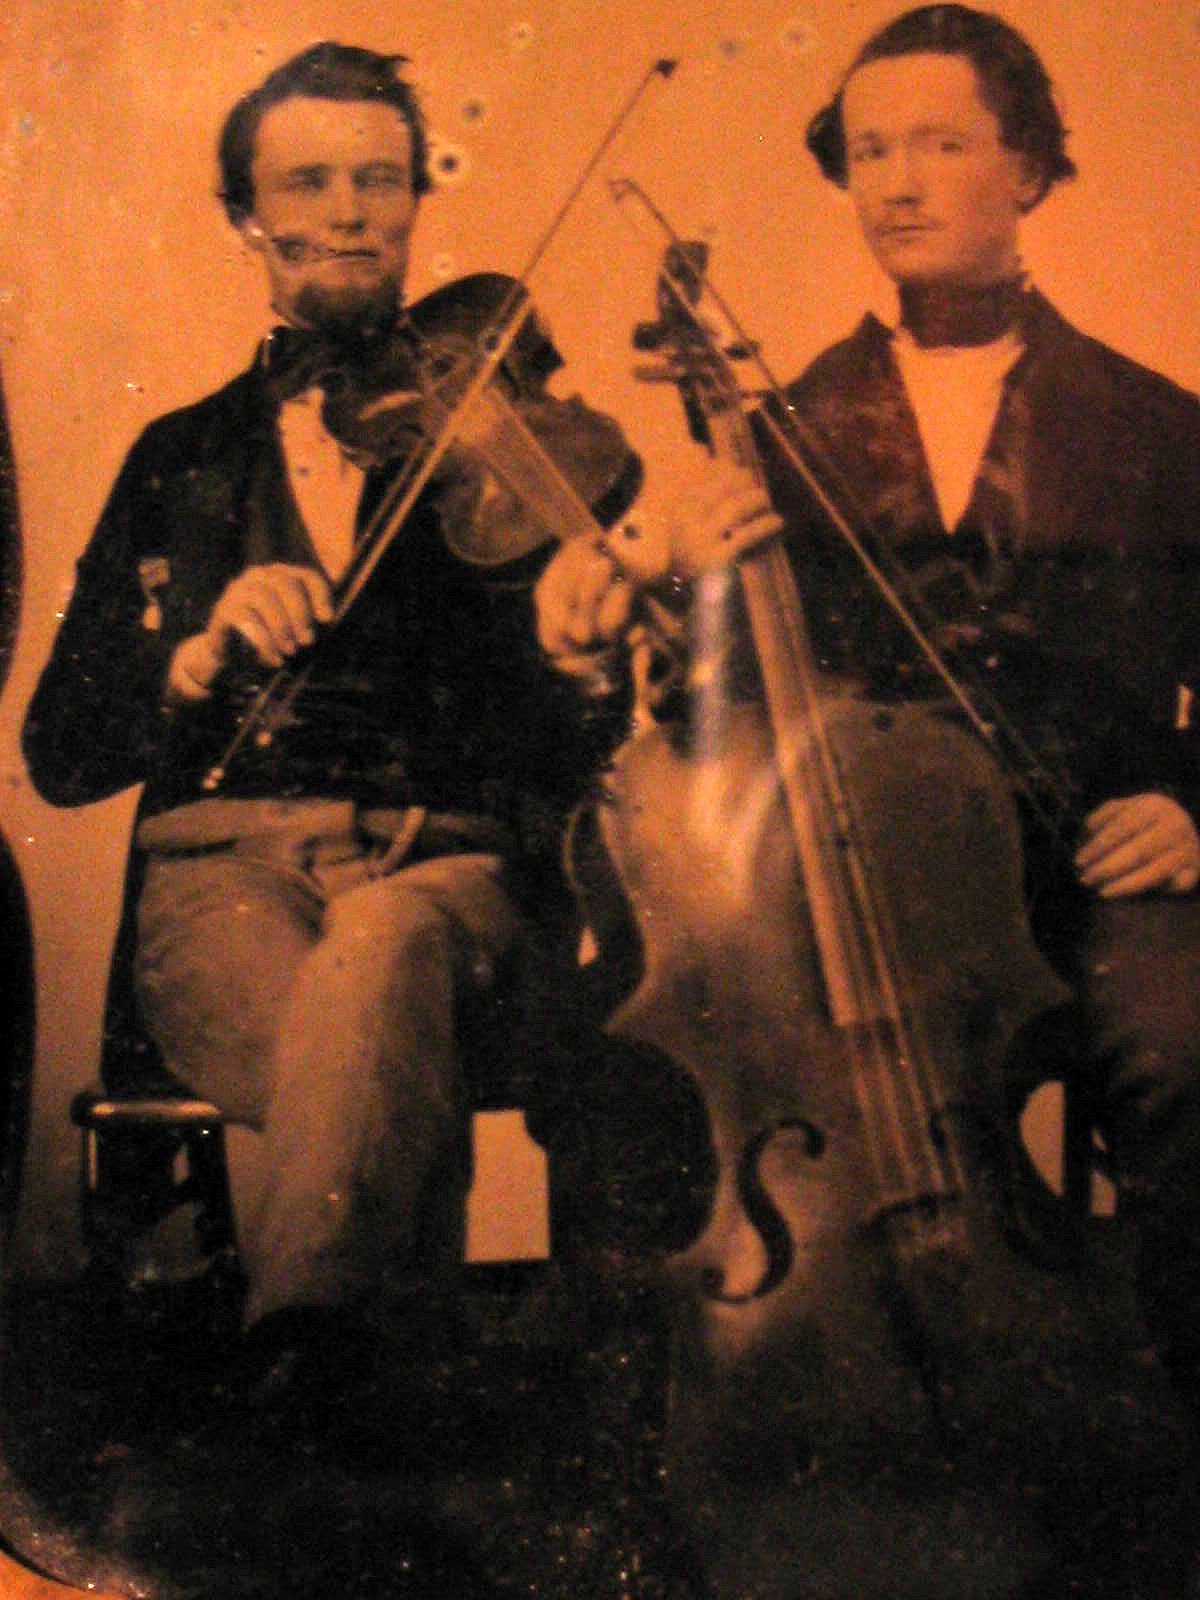 Ambrotype of my great-great-great-uncles, Ephraim R. Jones and John Quincy Adams Jones, about 1858-1860 in Illinois. I am descended from their brother, Martin Van Buren Jones, who went to northern California via the Oregon trail in 1852. Ephraim was an early-day portrait photographer (Jones and Hover Studio, Jacksonville, Illinois) and was, according to family lore, for a while a traveling fiddler and dancing master. He came to the northern California coast town of Crescent City to visit Martin and his family and probably brought this and my other Jones family ambrotypes with him, and I have inherited them. John Quincy Adams Jones was a young lawyer in Havana, Illinois with a promising career ahead of him when he enlisted as a Lieutenant in Company K, 17th Regiment, Illinois Volunteer Infantry in 1861, and was killed in the battle of Fredericktown, Missouri on Oct. 24, 1861. View full size.